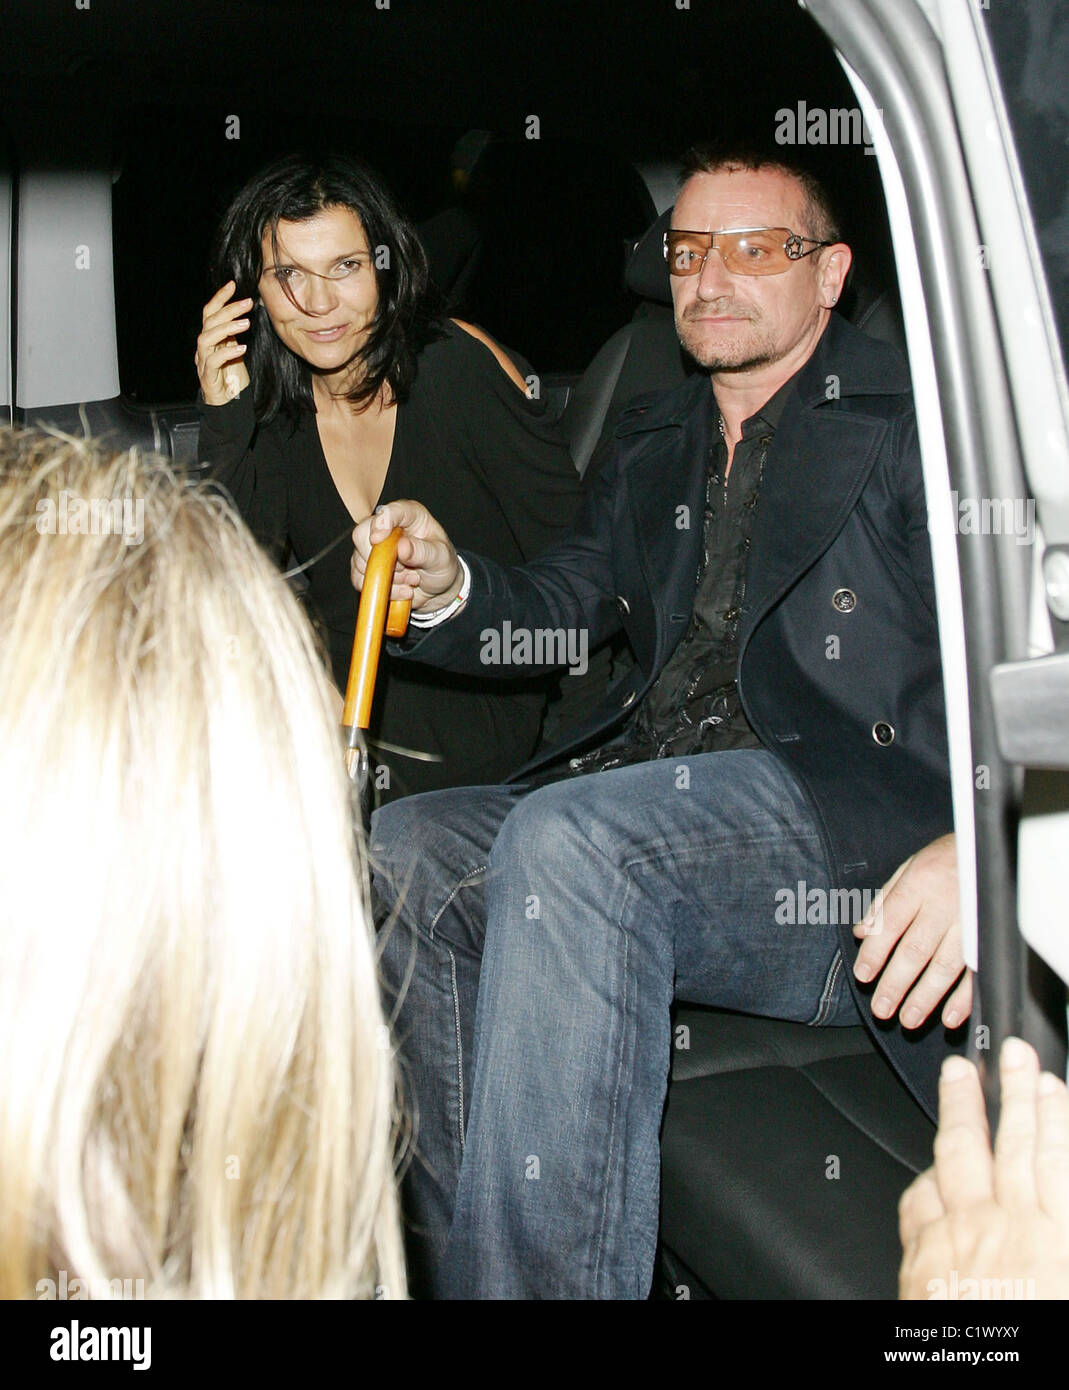 Bono and Ali Hewson leave Home House Private Members Club after party for U2's Portman Square secret show London, England - Stock Photo